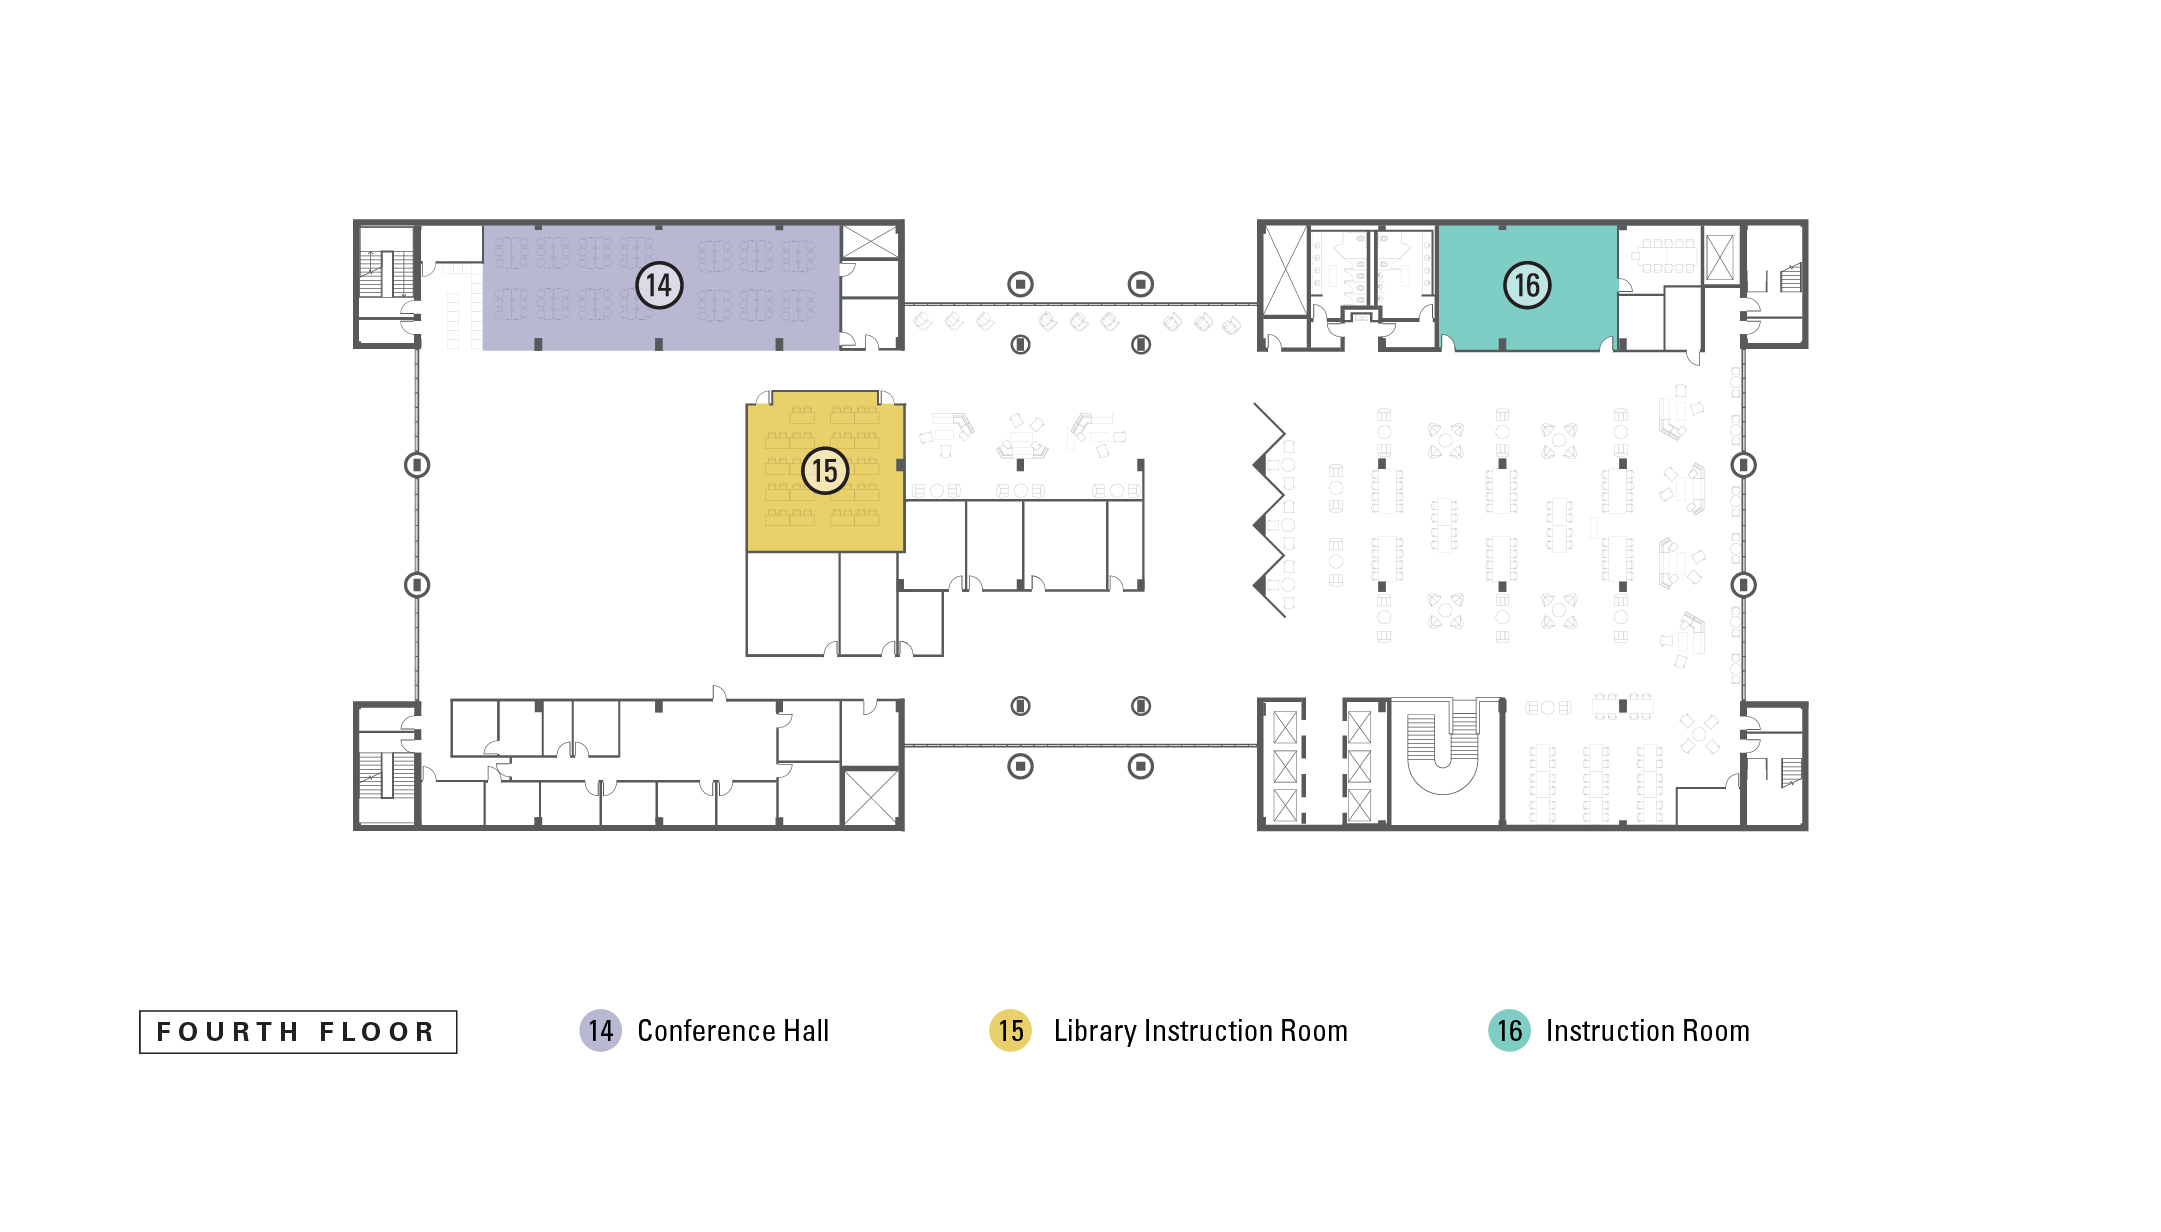 Floorplan of 4th floor with highlighted spaces that correspond to numbered descriptions